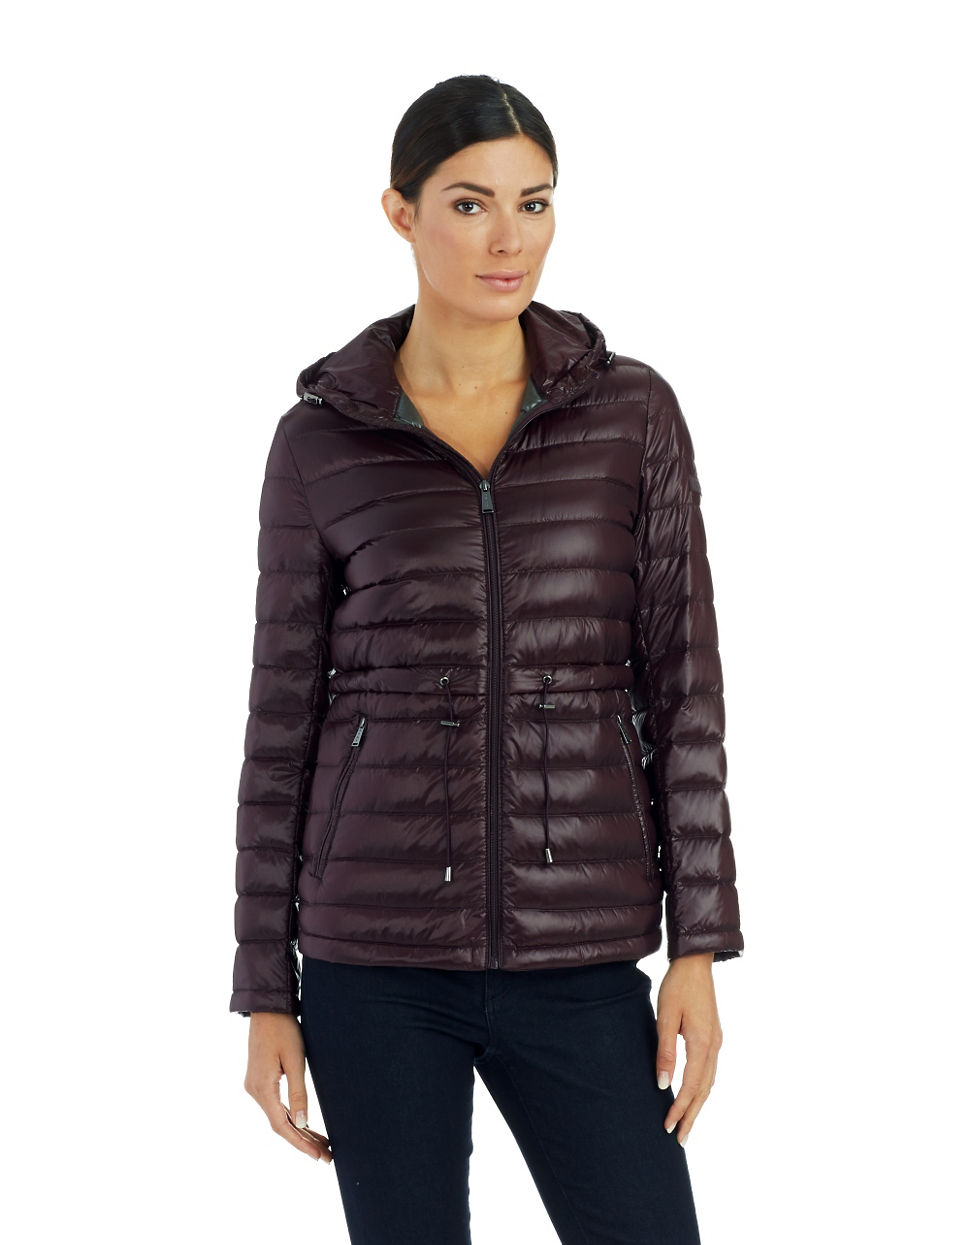 DKNY Packable Jacket in Red - Lyst